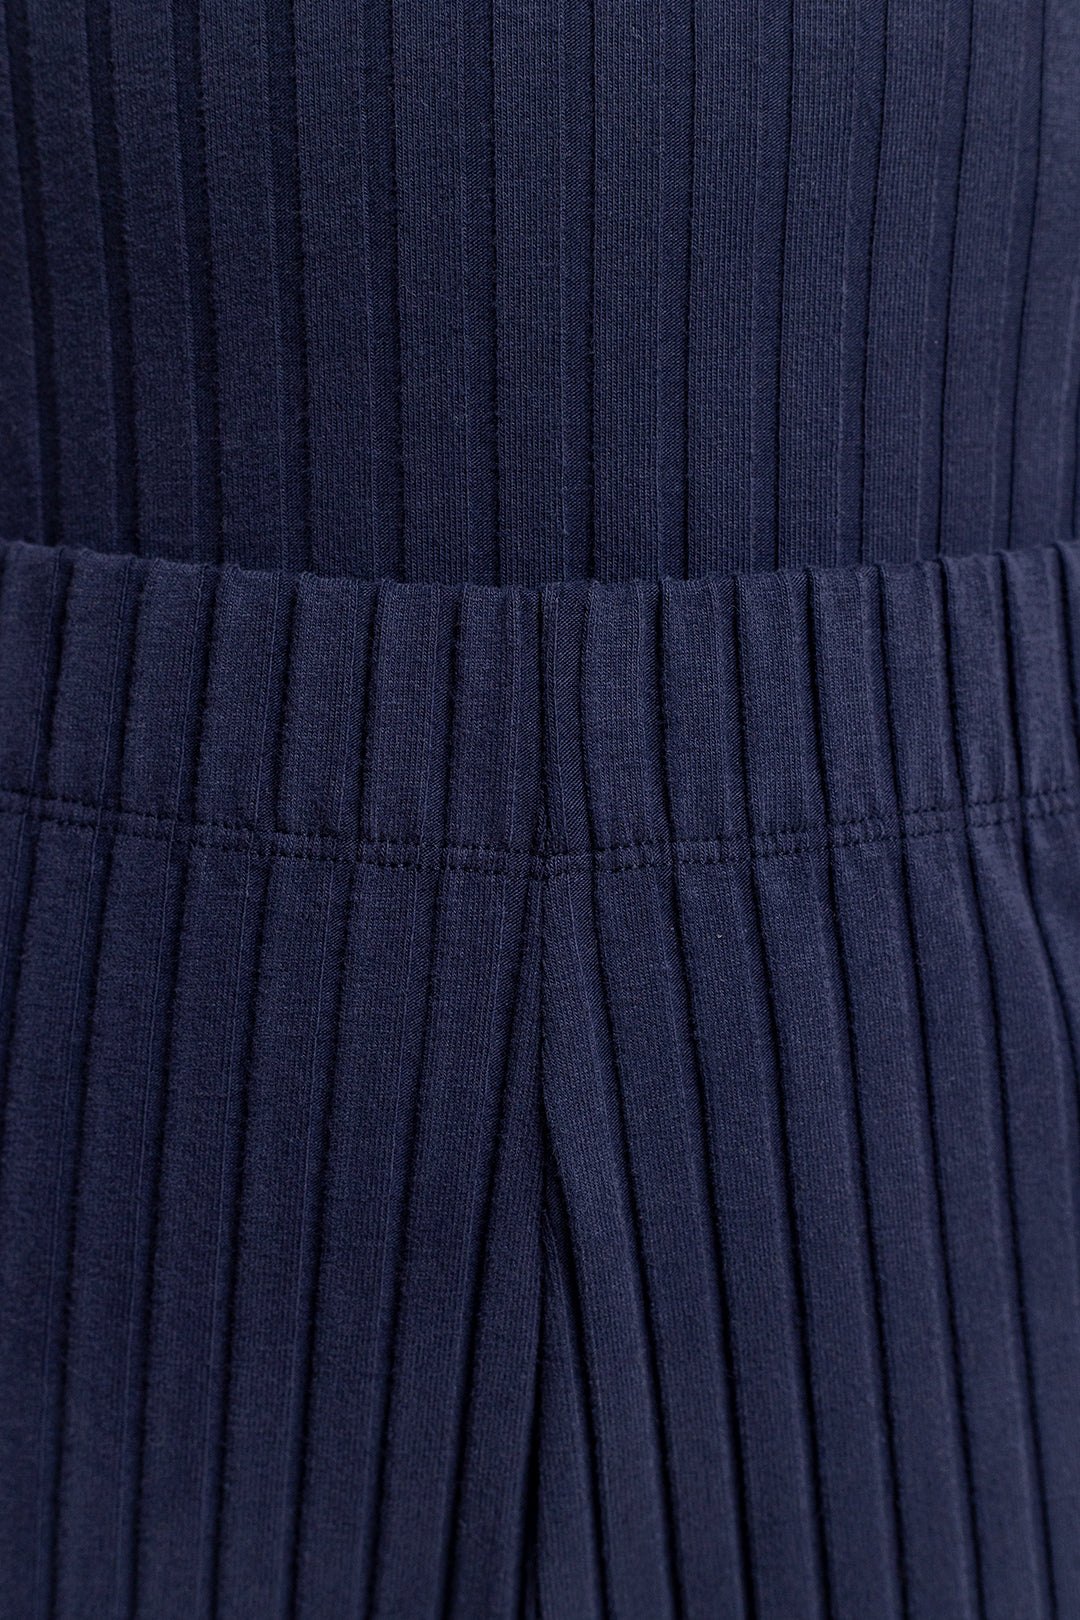 Dark blue, ribbed trousers made of organic cotton from Rotholz